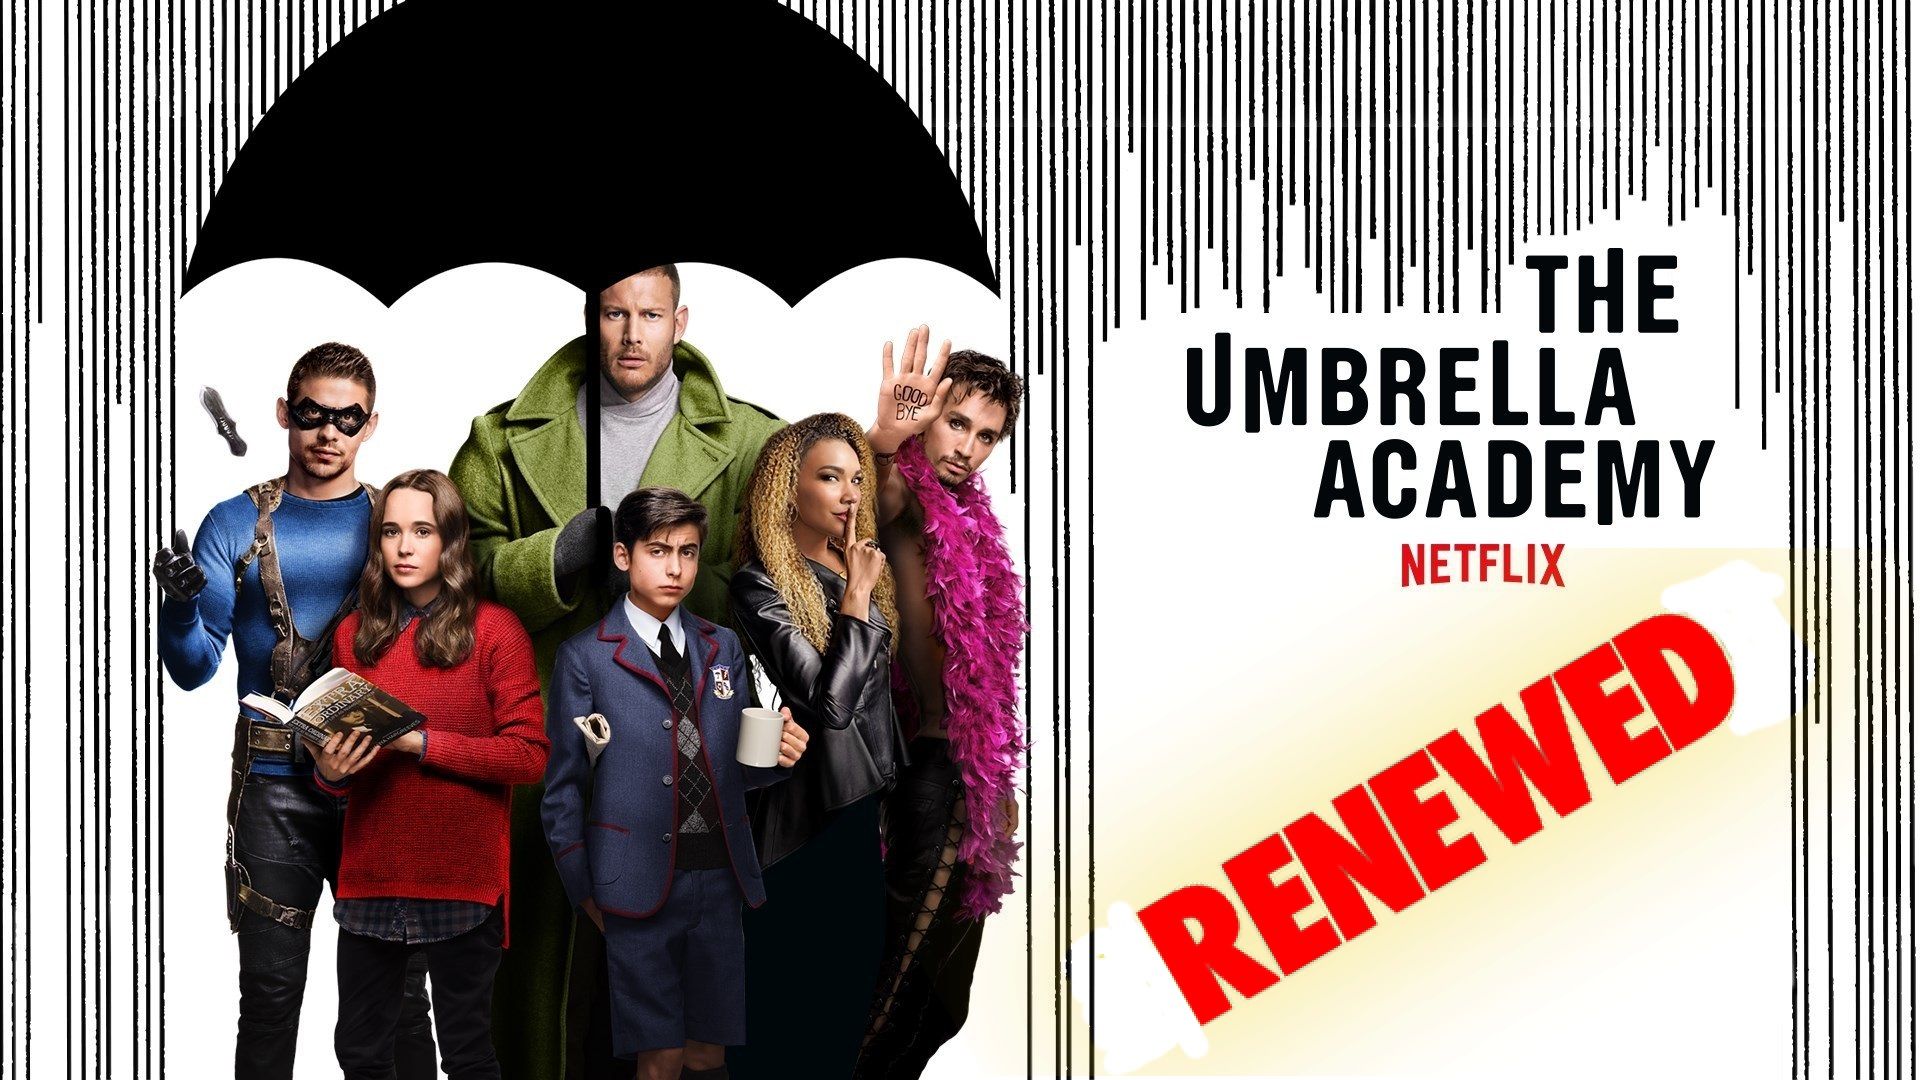 The Umbrella Academy renewed for a second season Let's Talk About